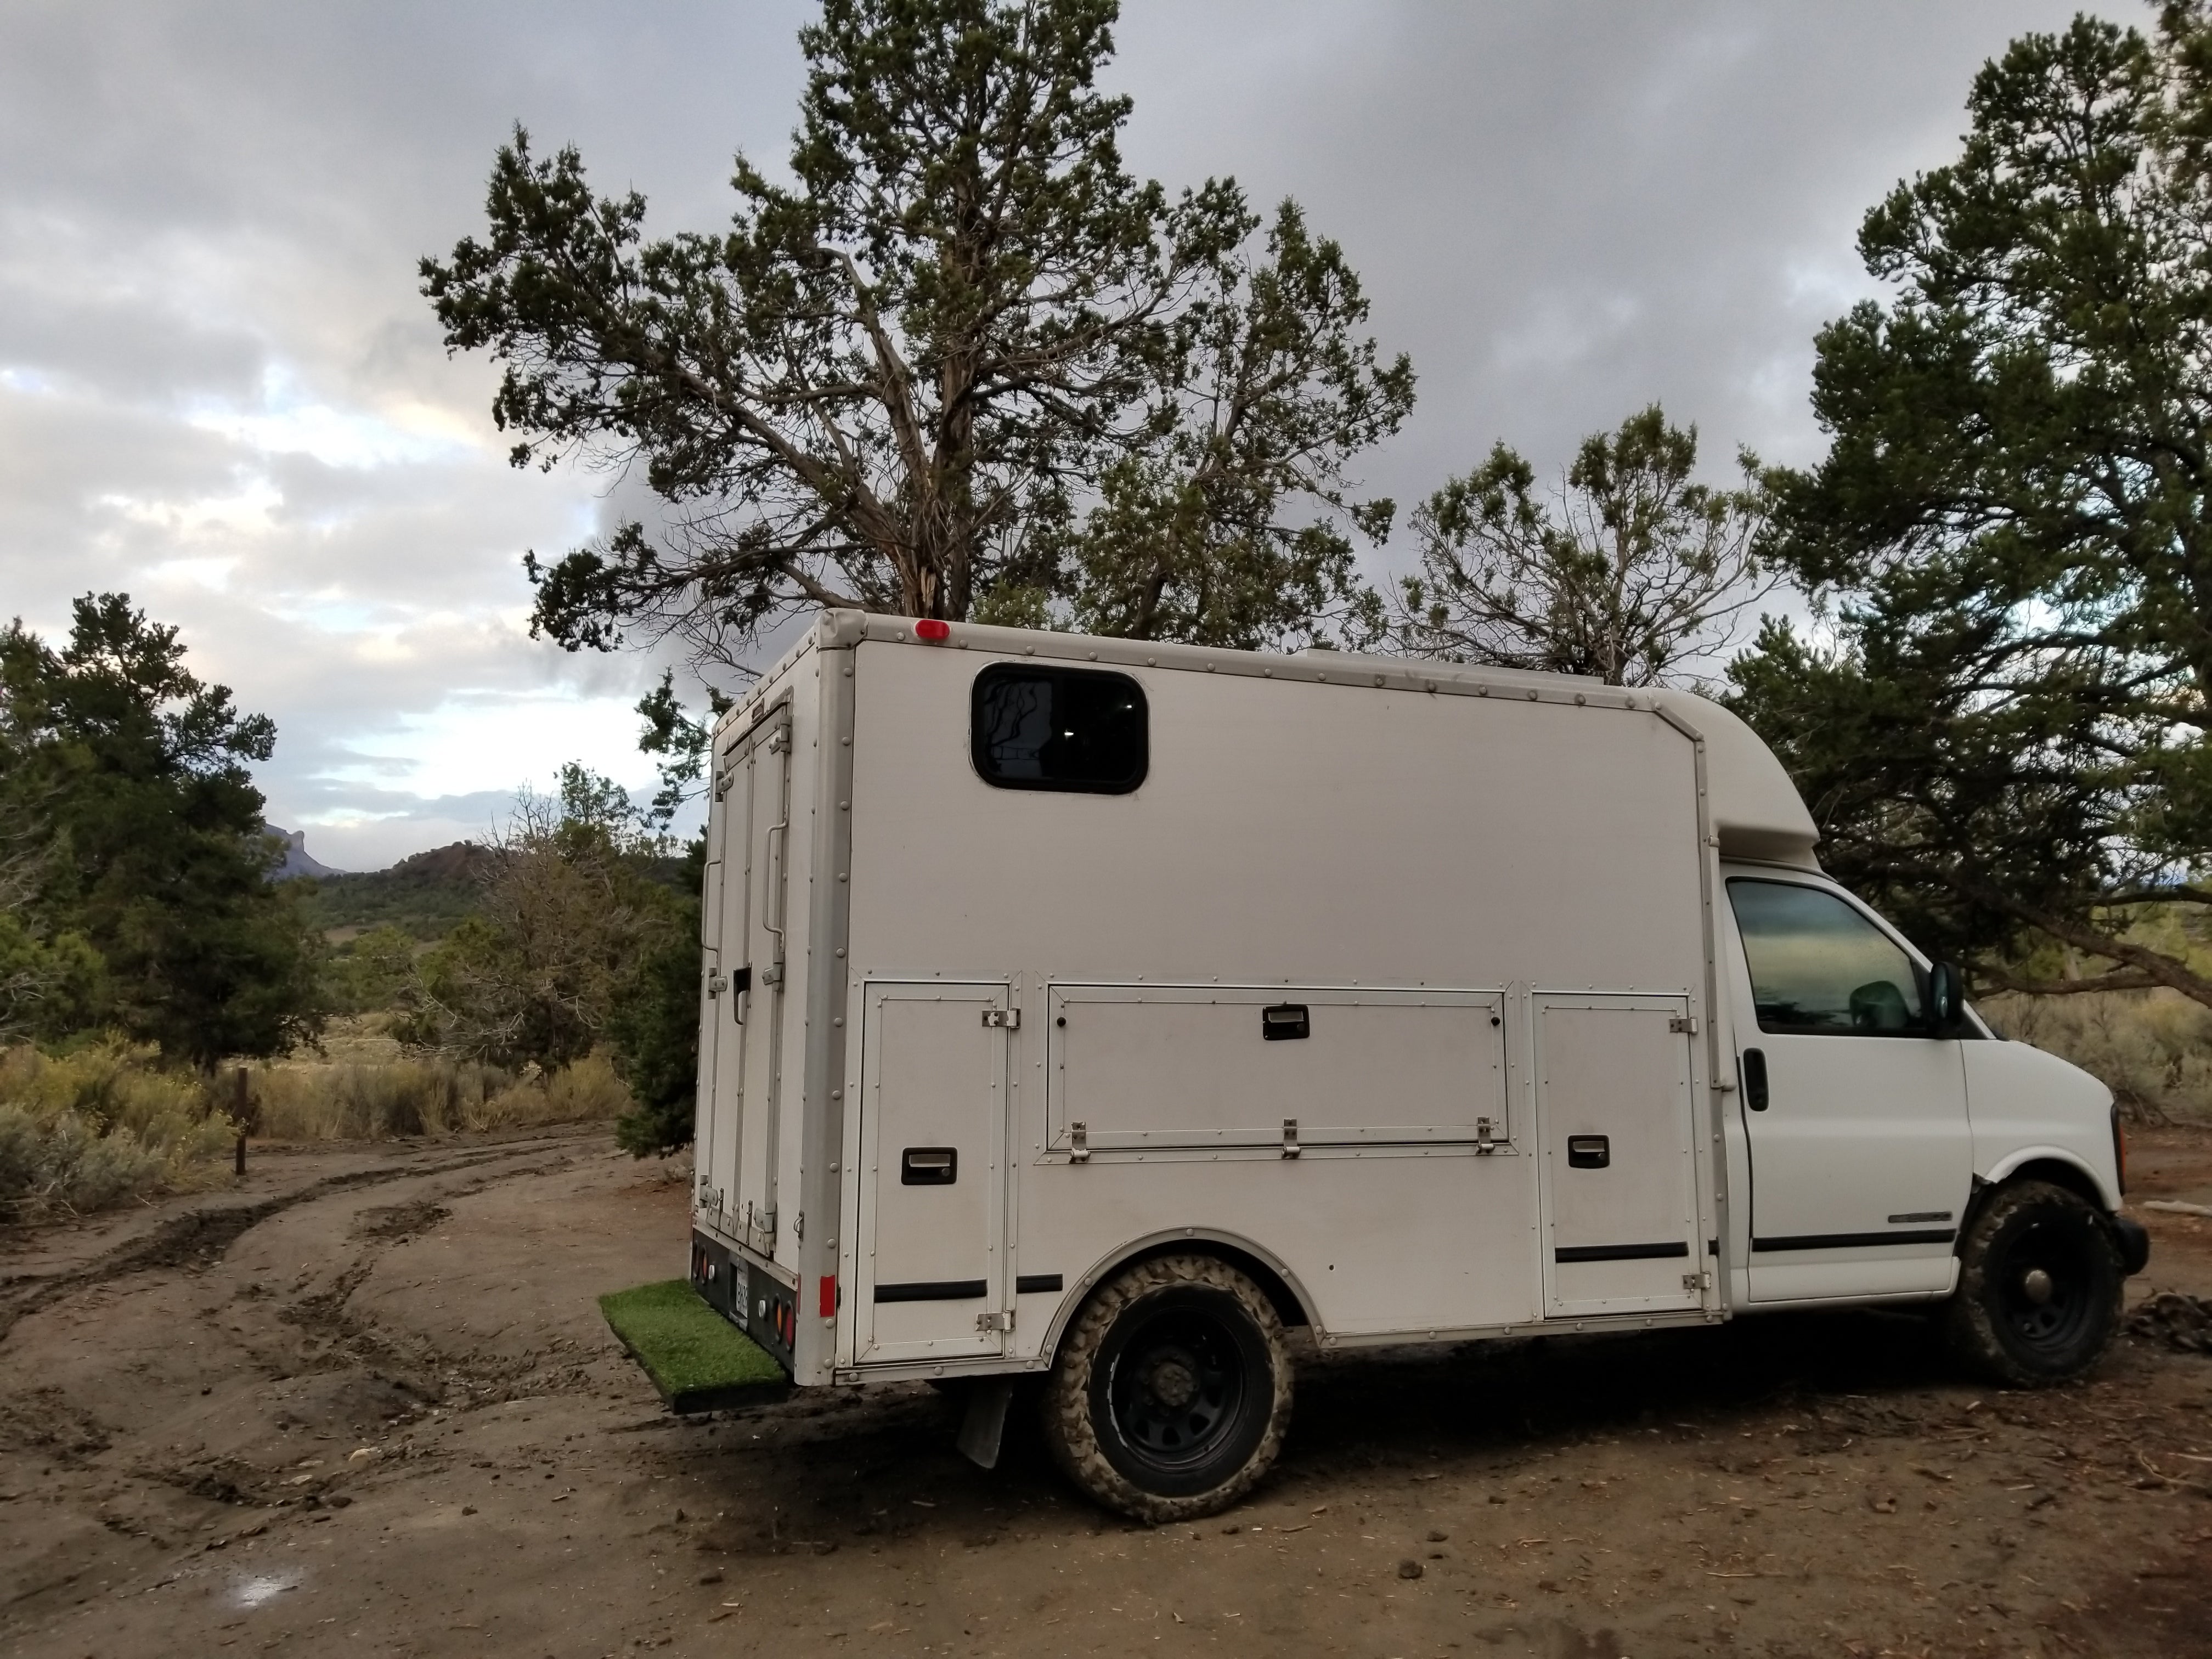 Our Van in the campsite (notice the mud tracks)